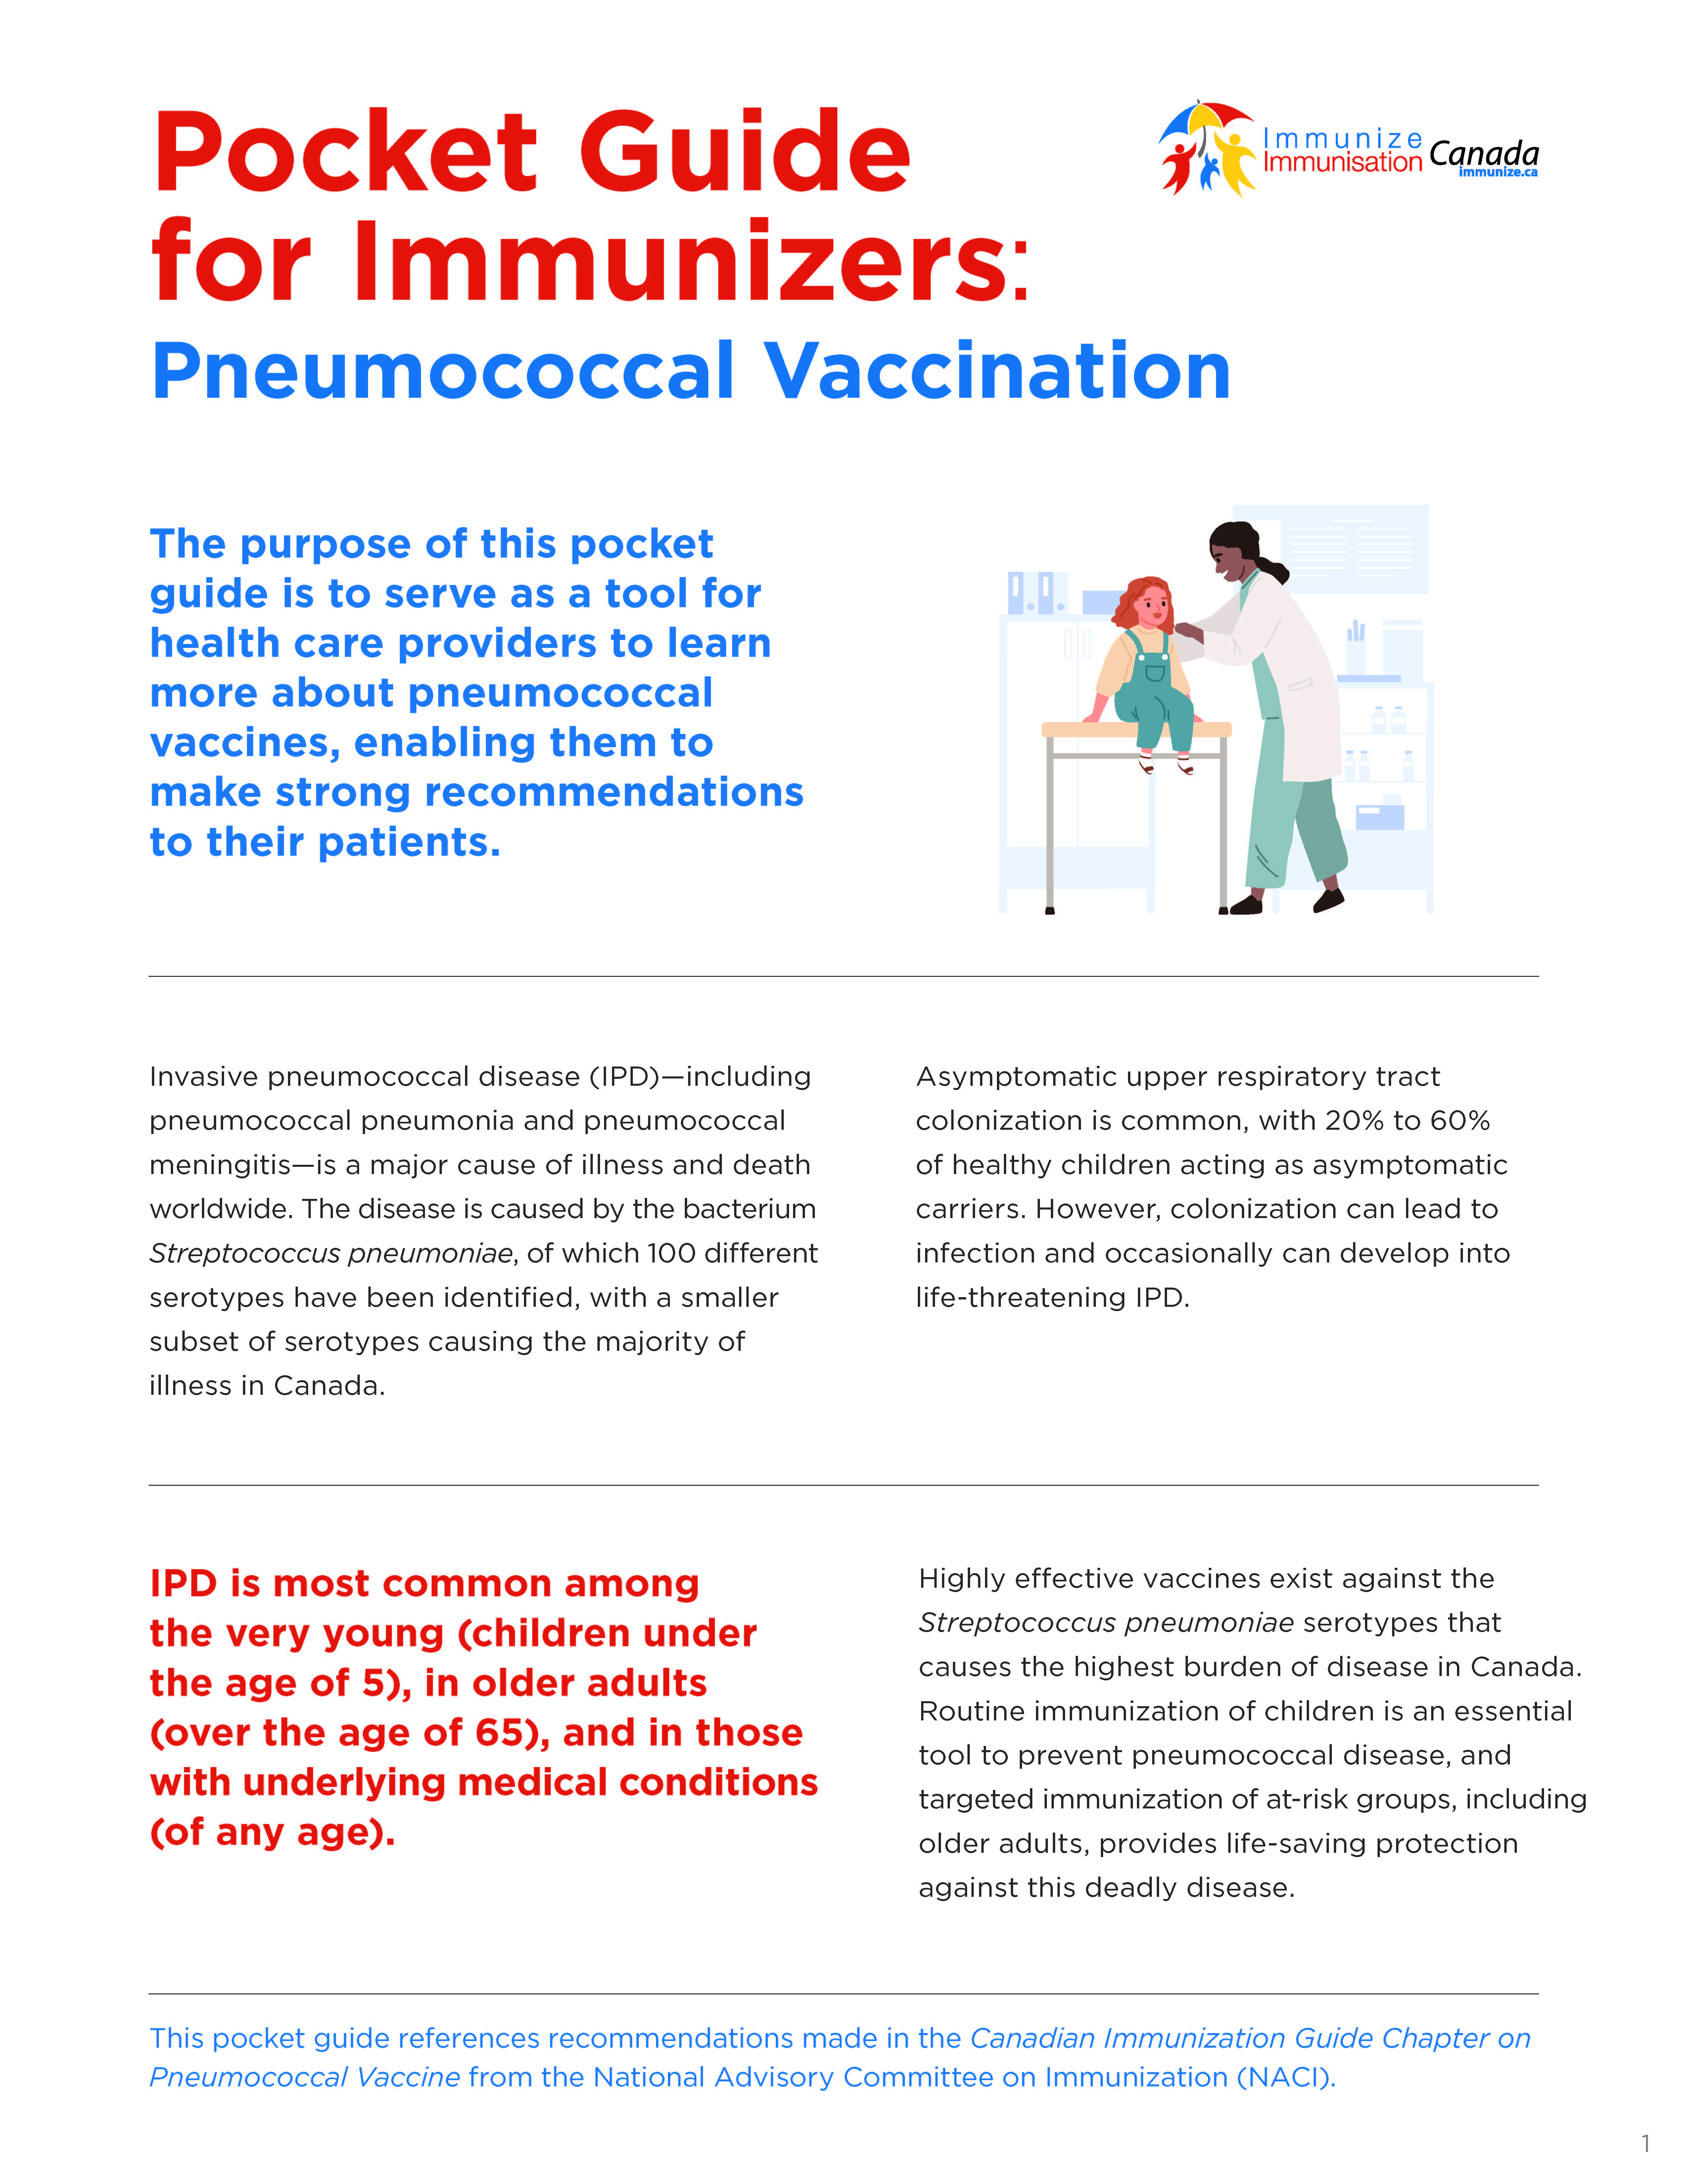 Pocket guide for immunizers: Pneumococcal vaccination